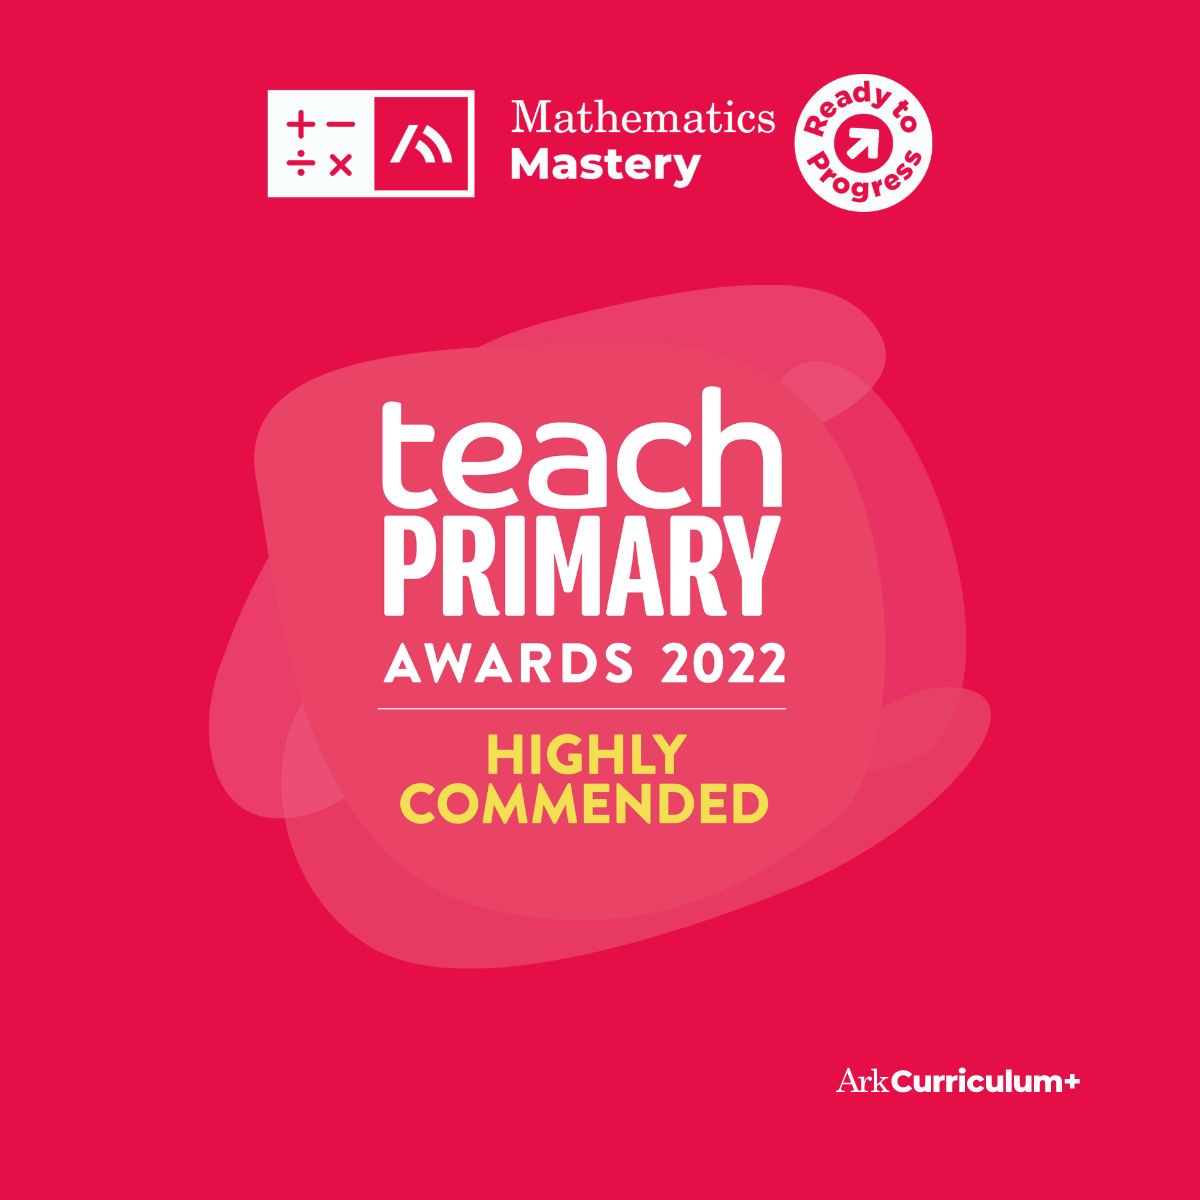 Ready to Progress interventions highly commended by Teach Primary